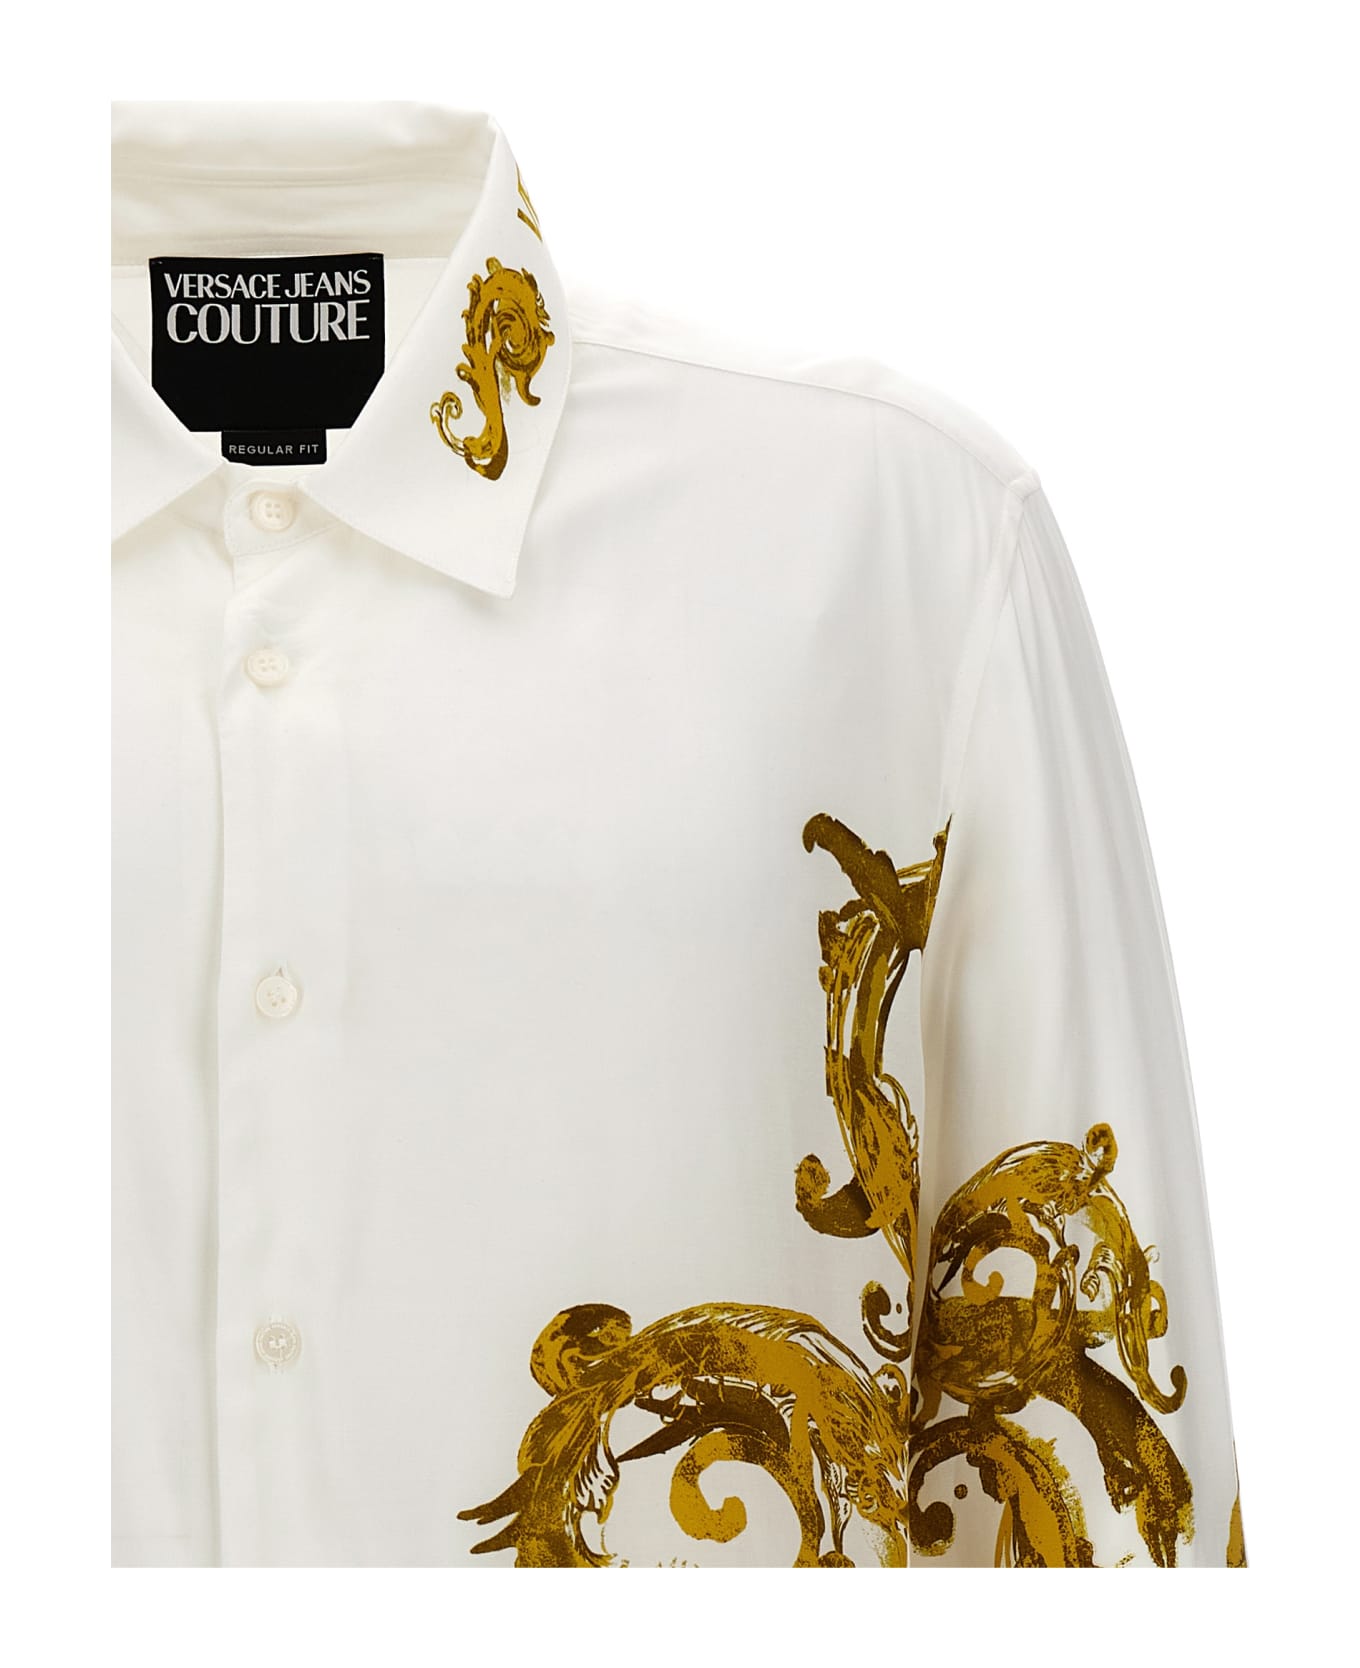 Versace Jeans Couture 'baroque' Shirt - White シャツ